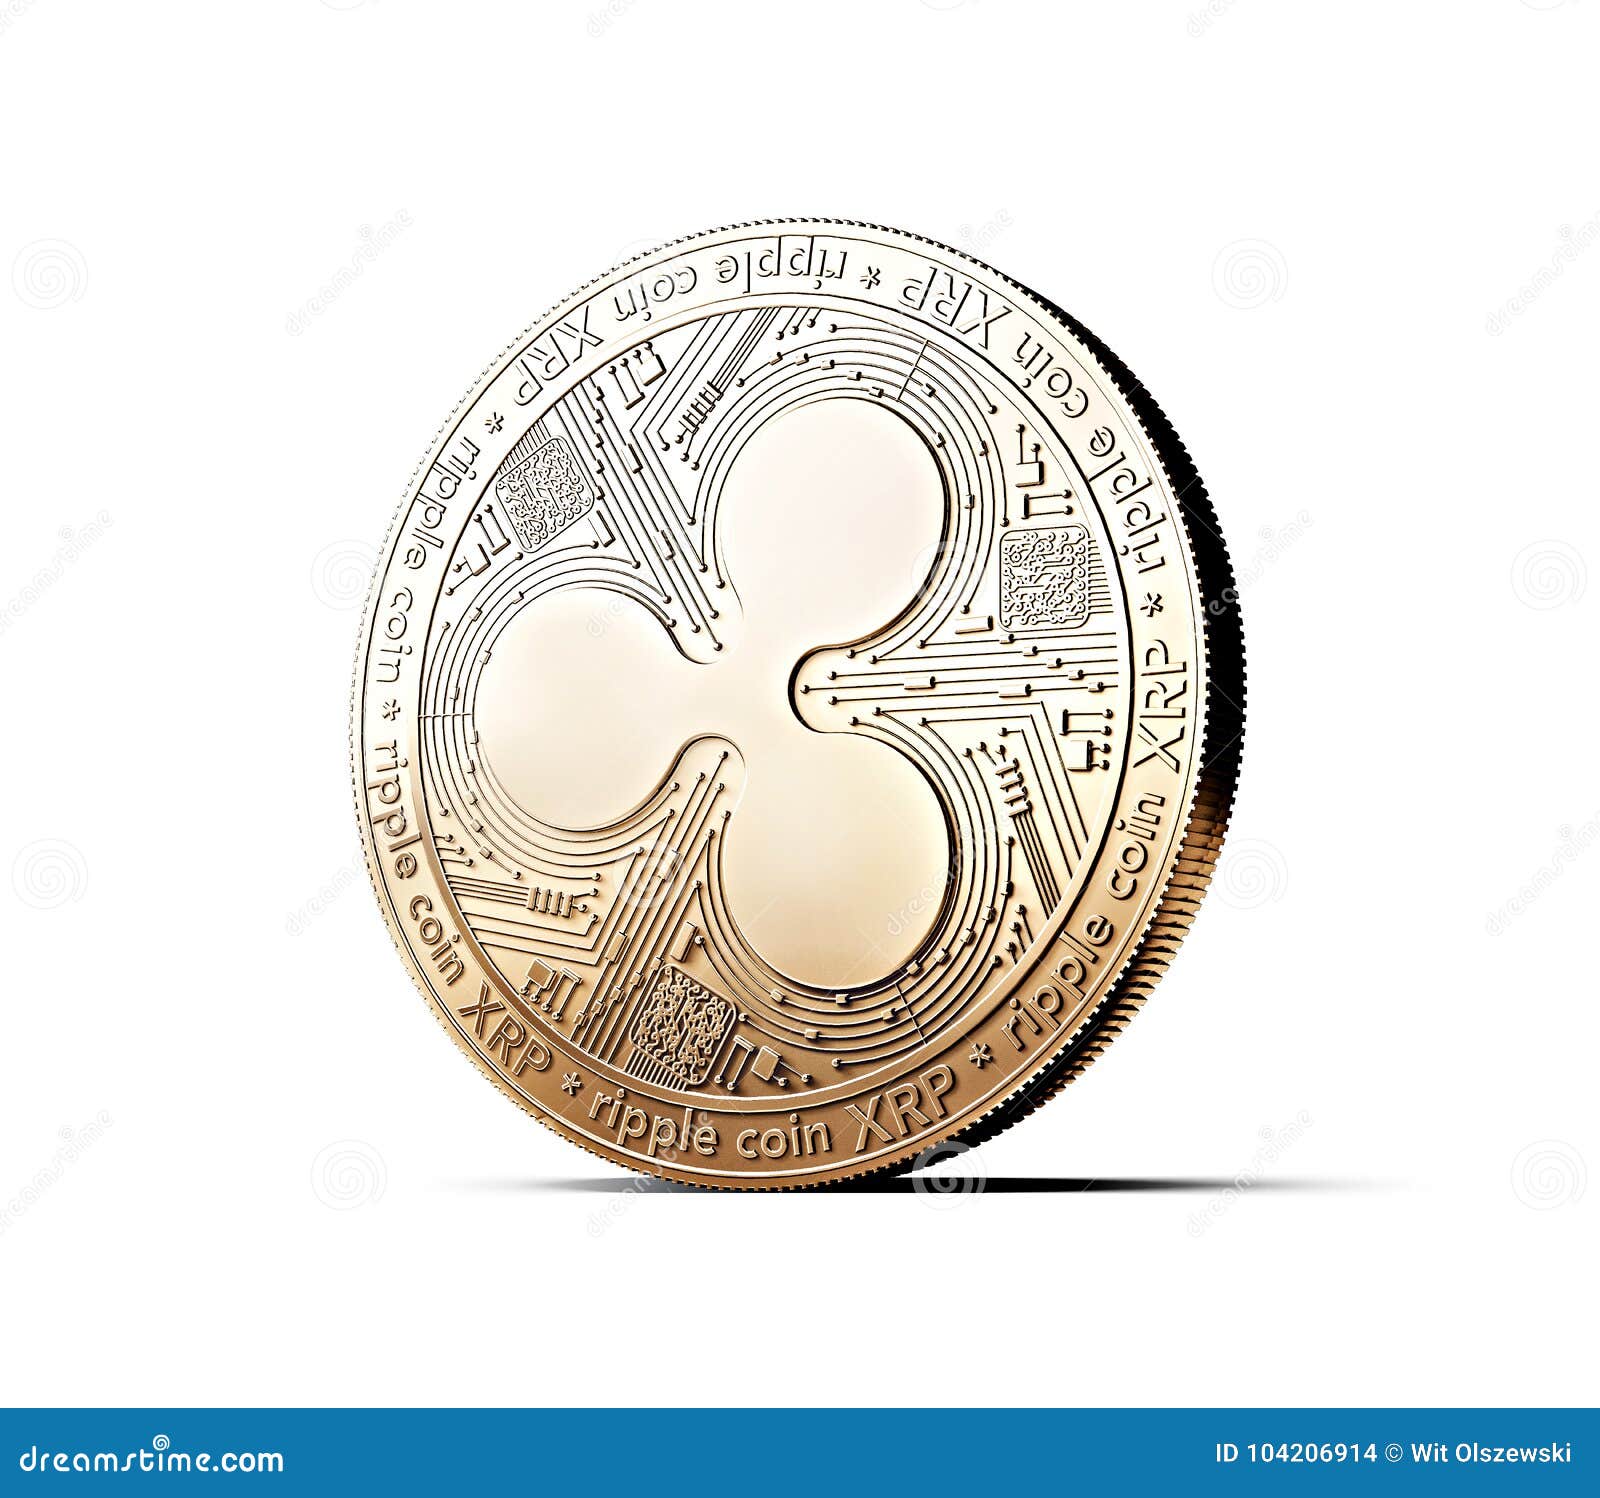 xrp free coin)